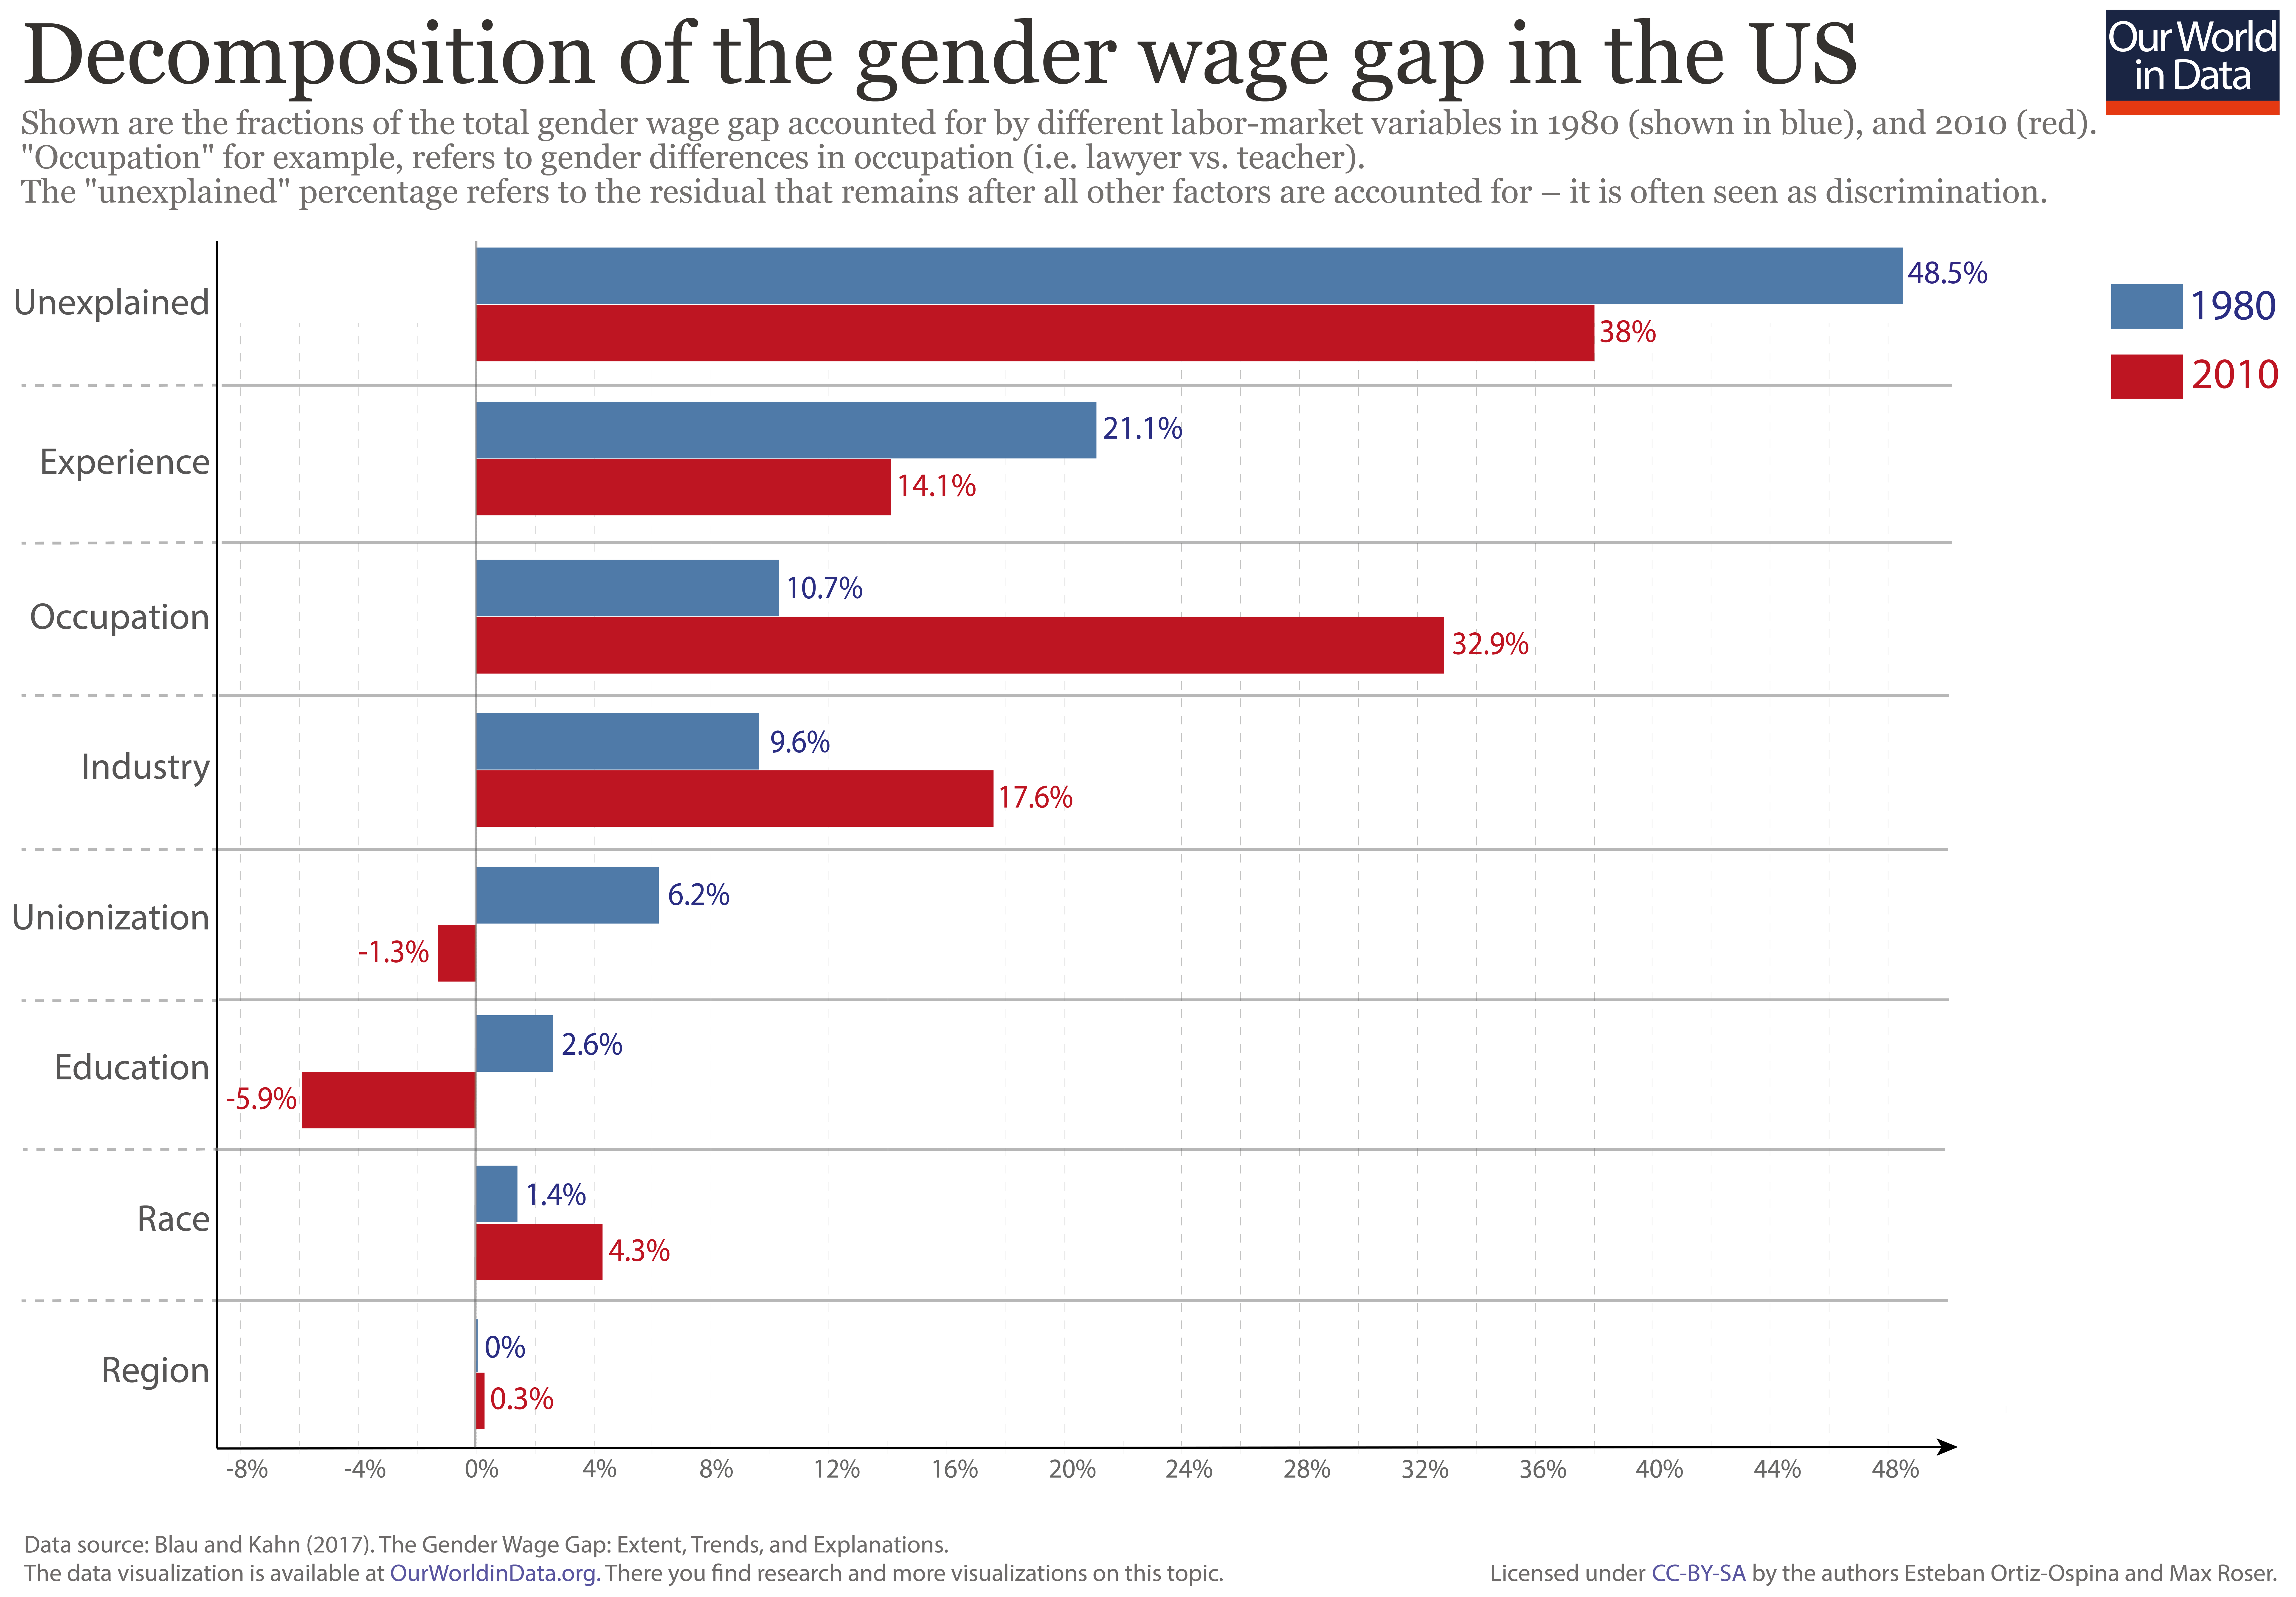 Bar chart of the fractions of the total gender wage gap accounted for by different labor-market variables in 1980 and 2010. Education and work experience have become much less important in explaining gender differences in wages over time, while occupation and industry have become more important.